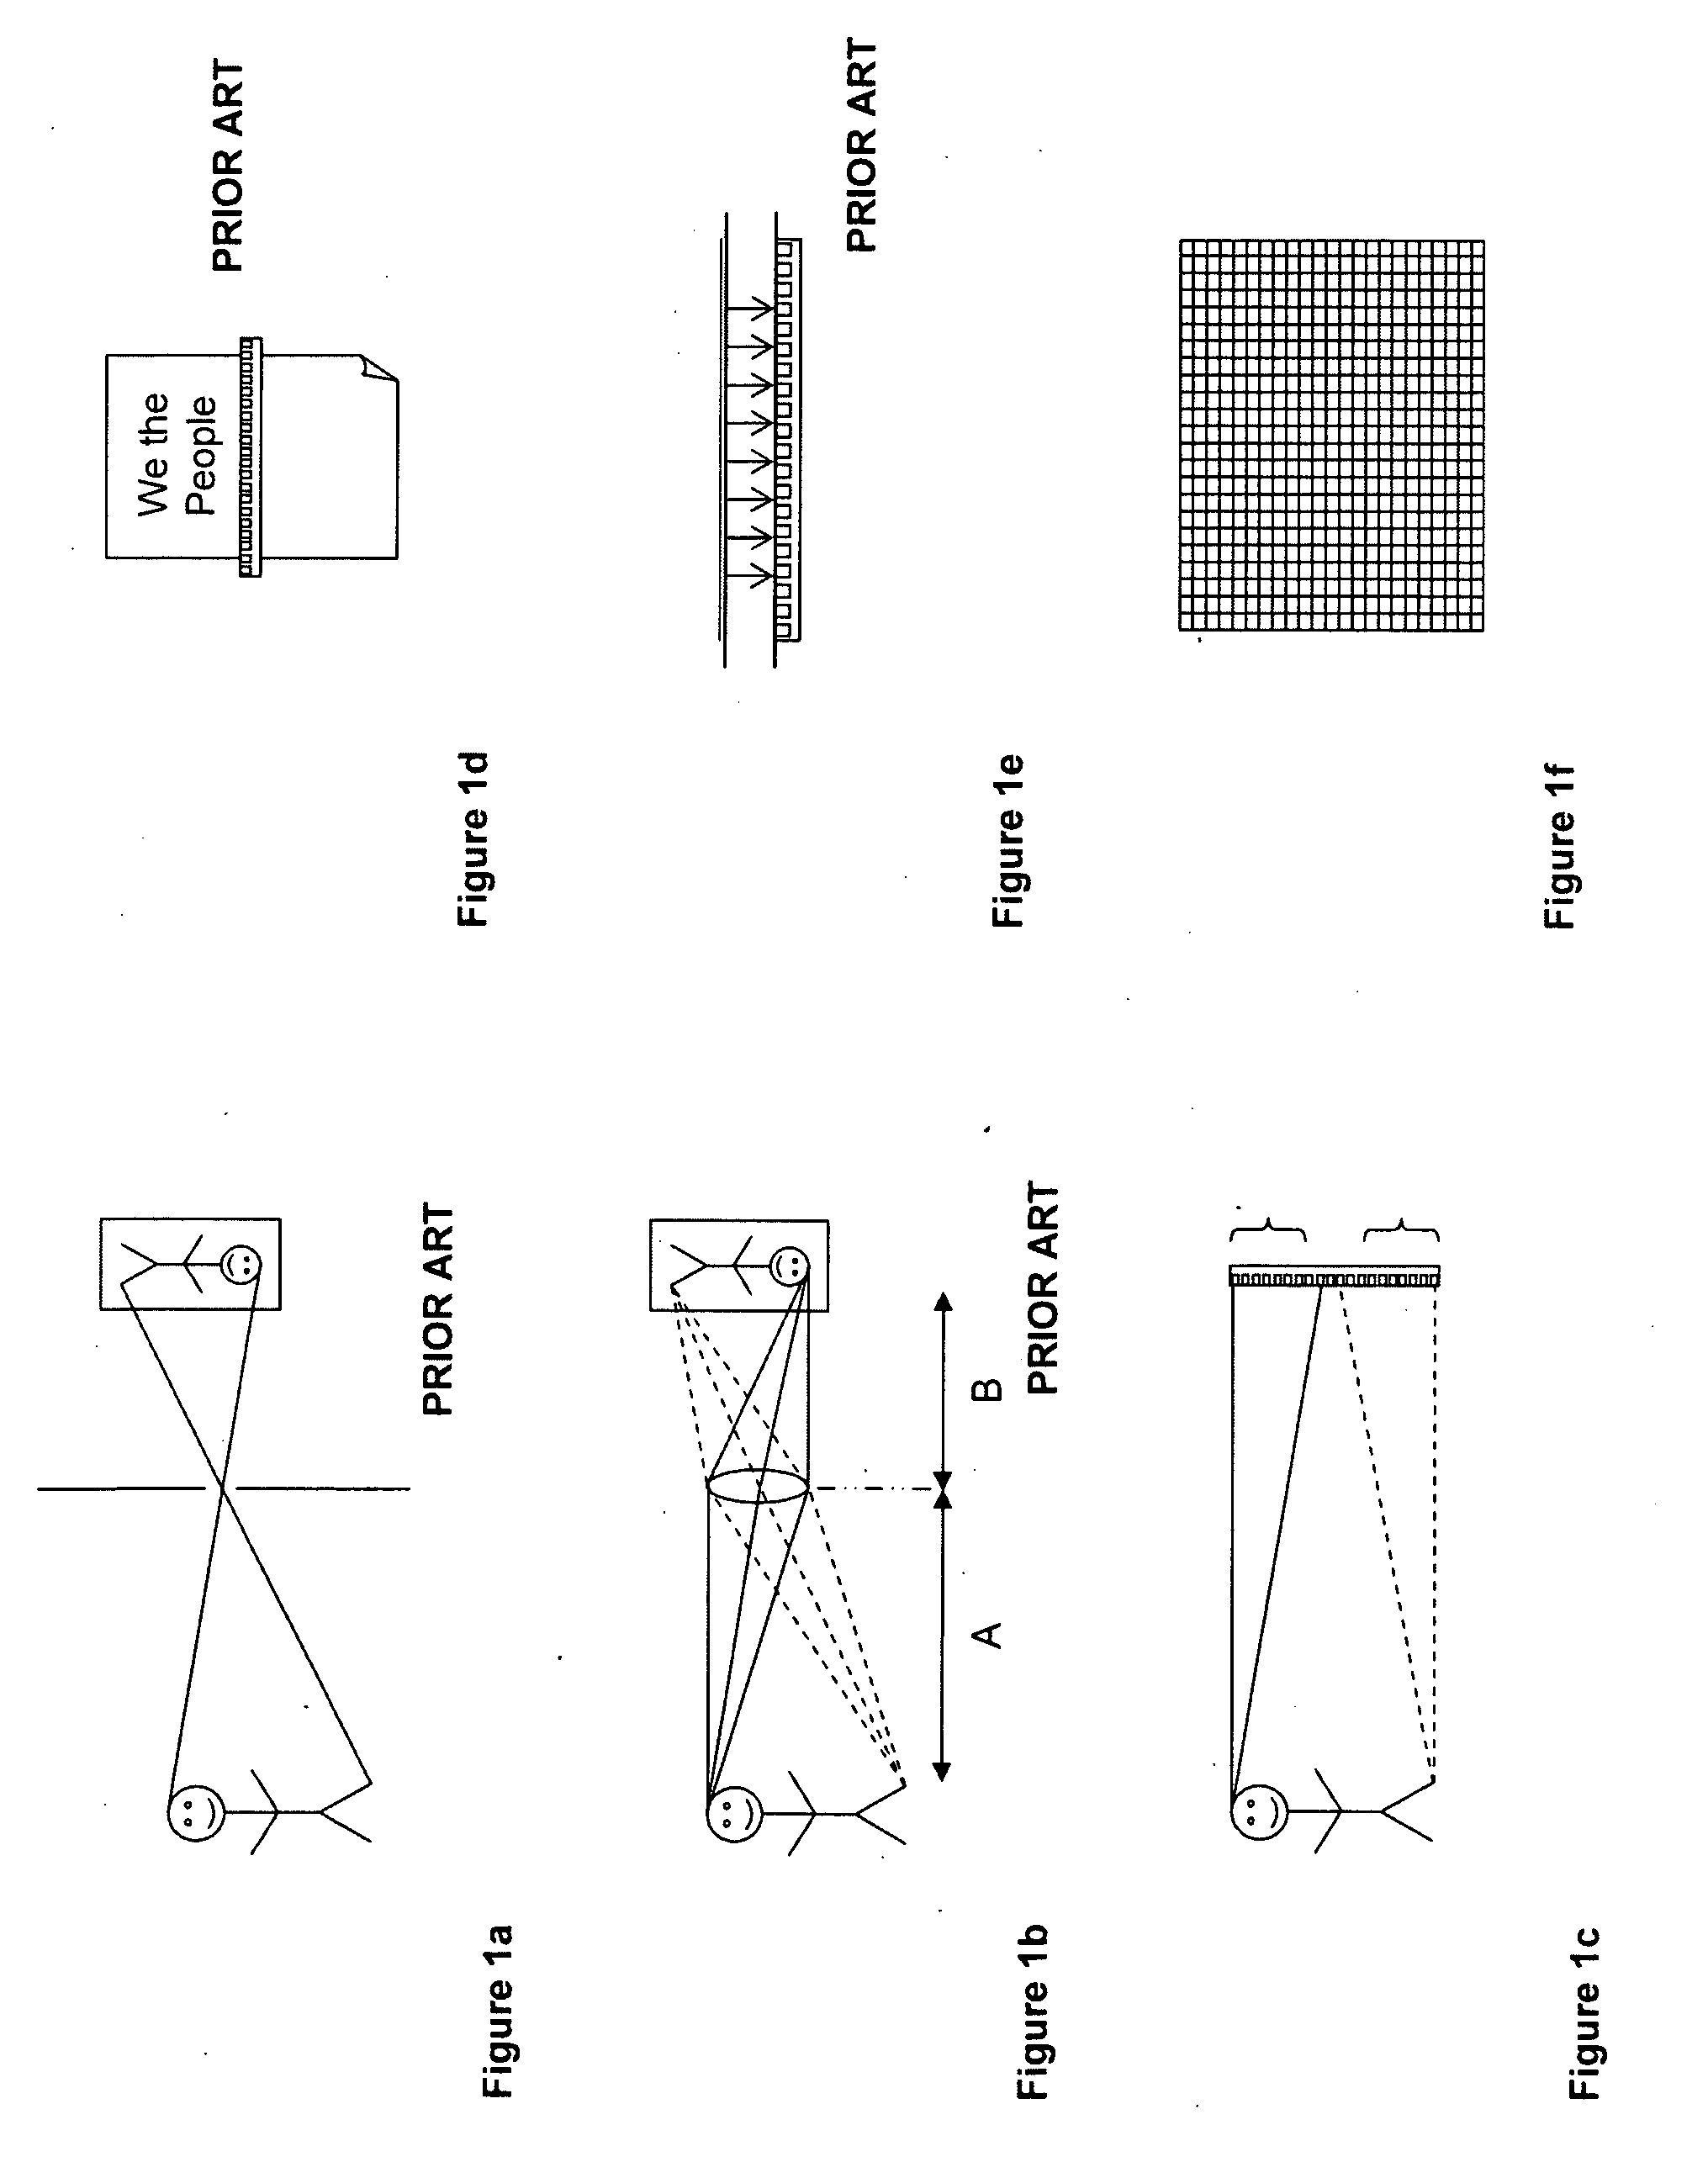 Image formation for large photosensor array surfaces